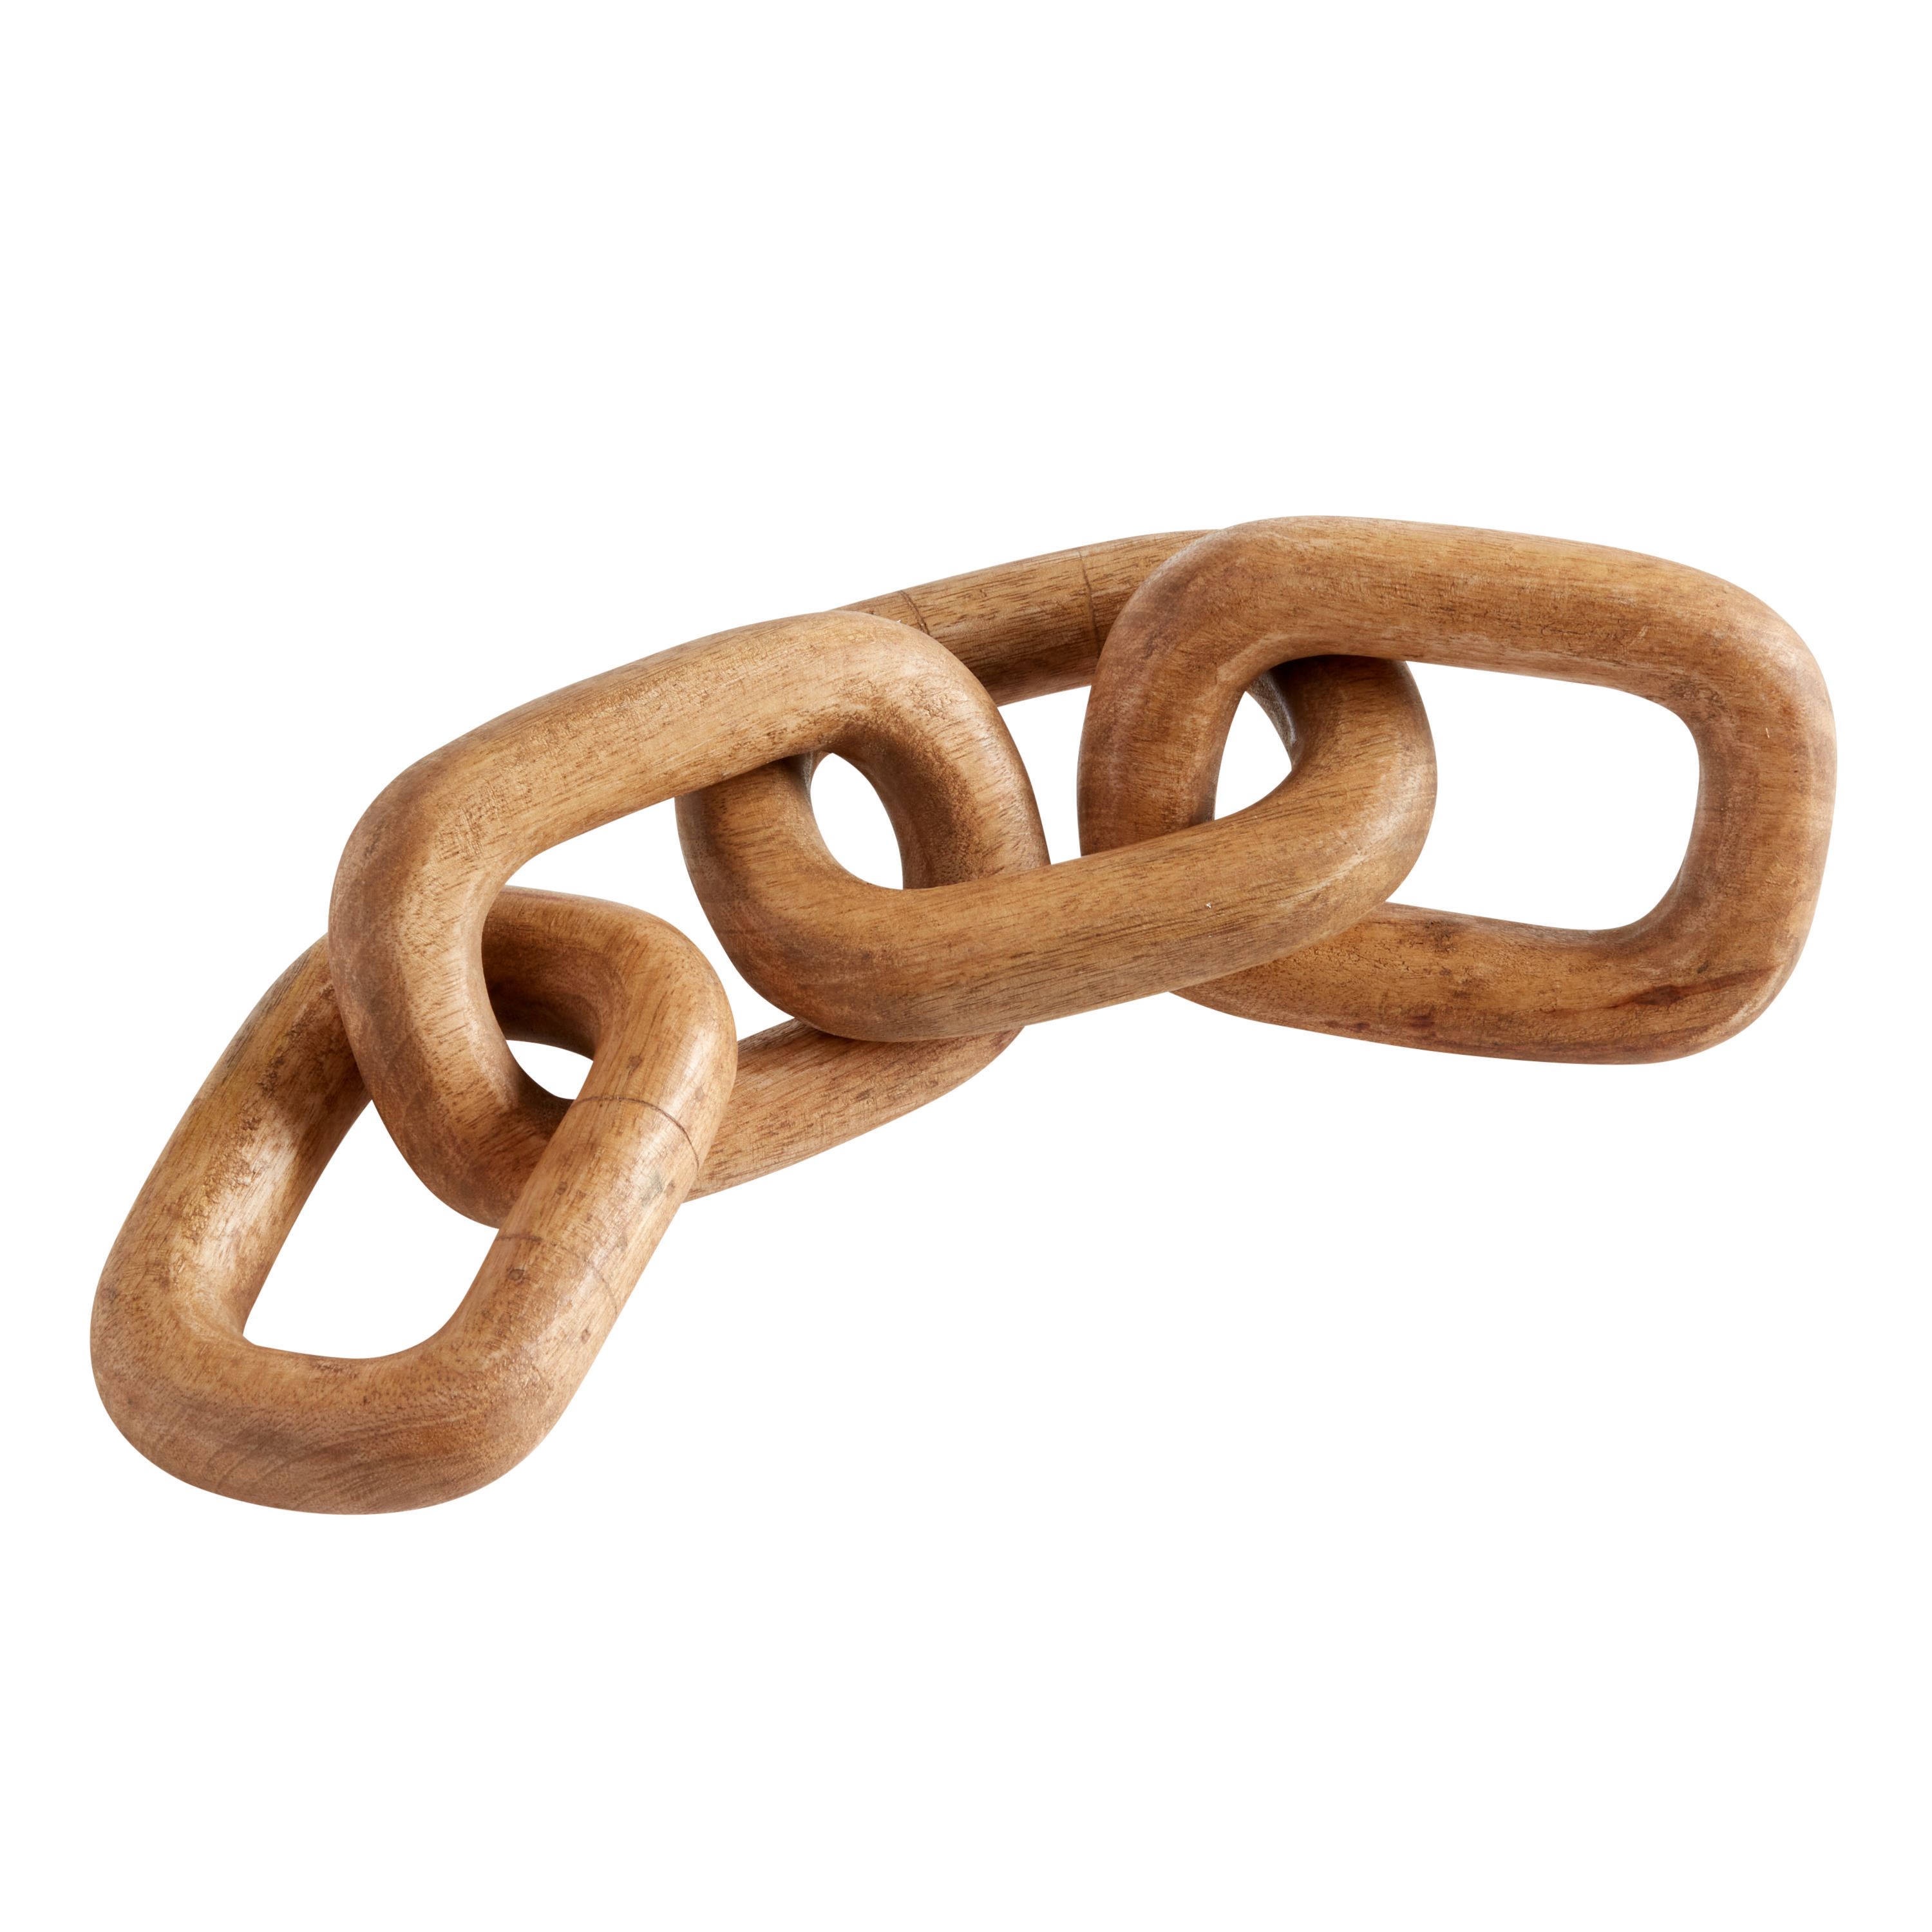 Hand Carved Wood Chain Link Decor | World Market